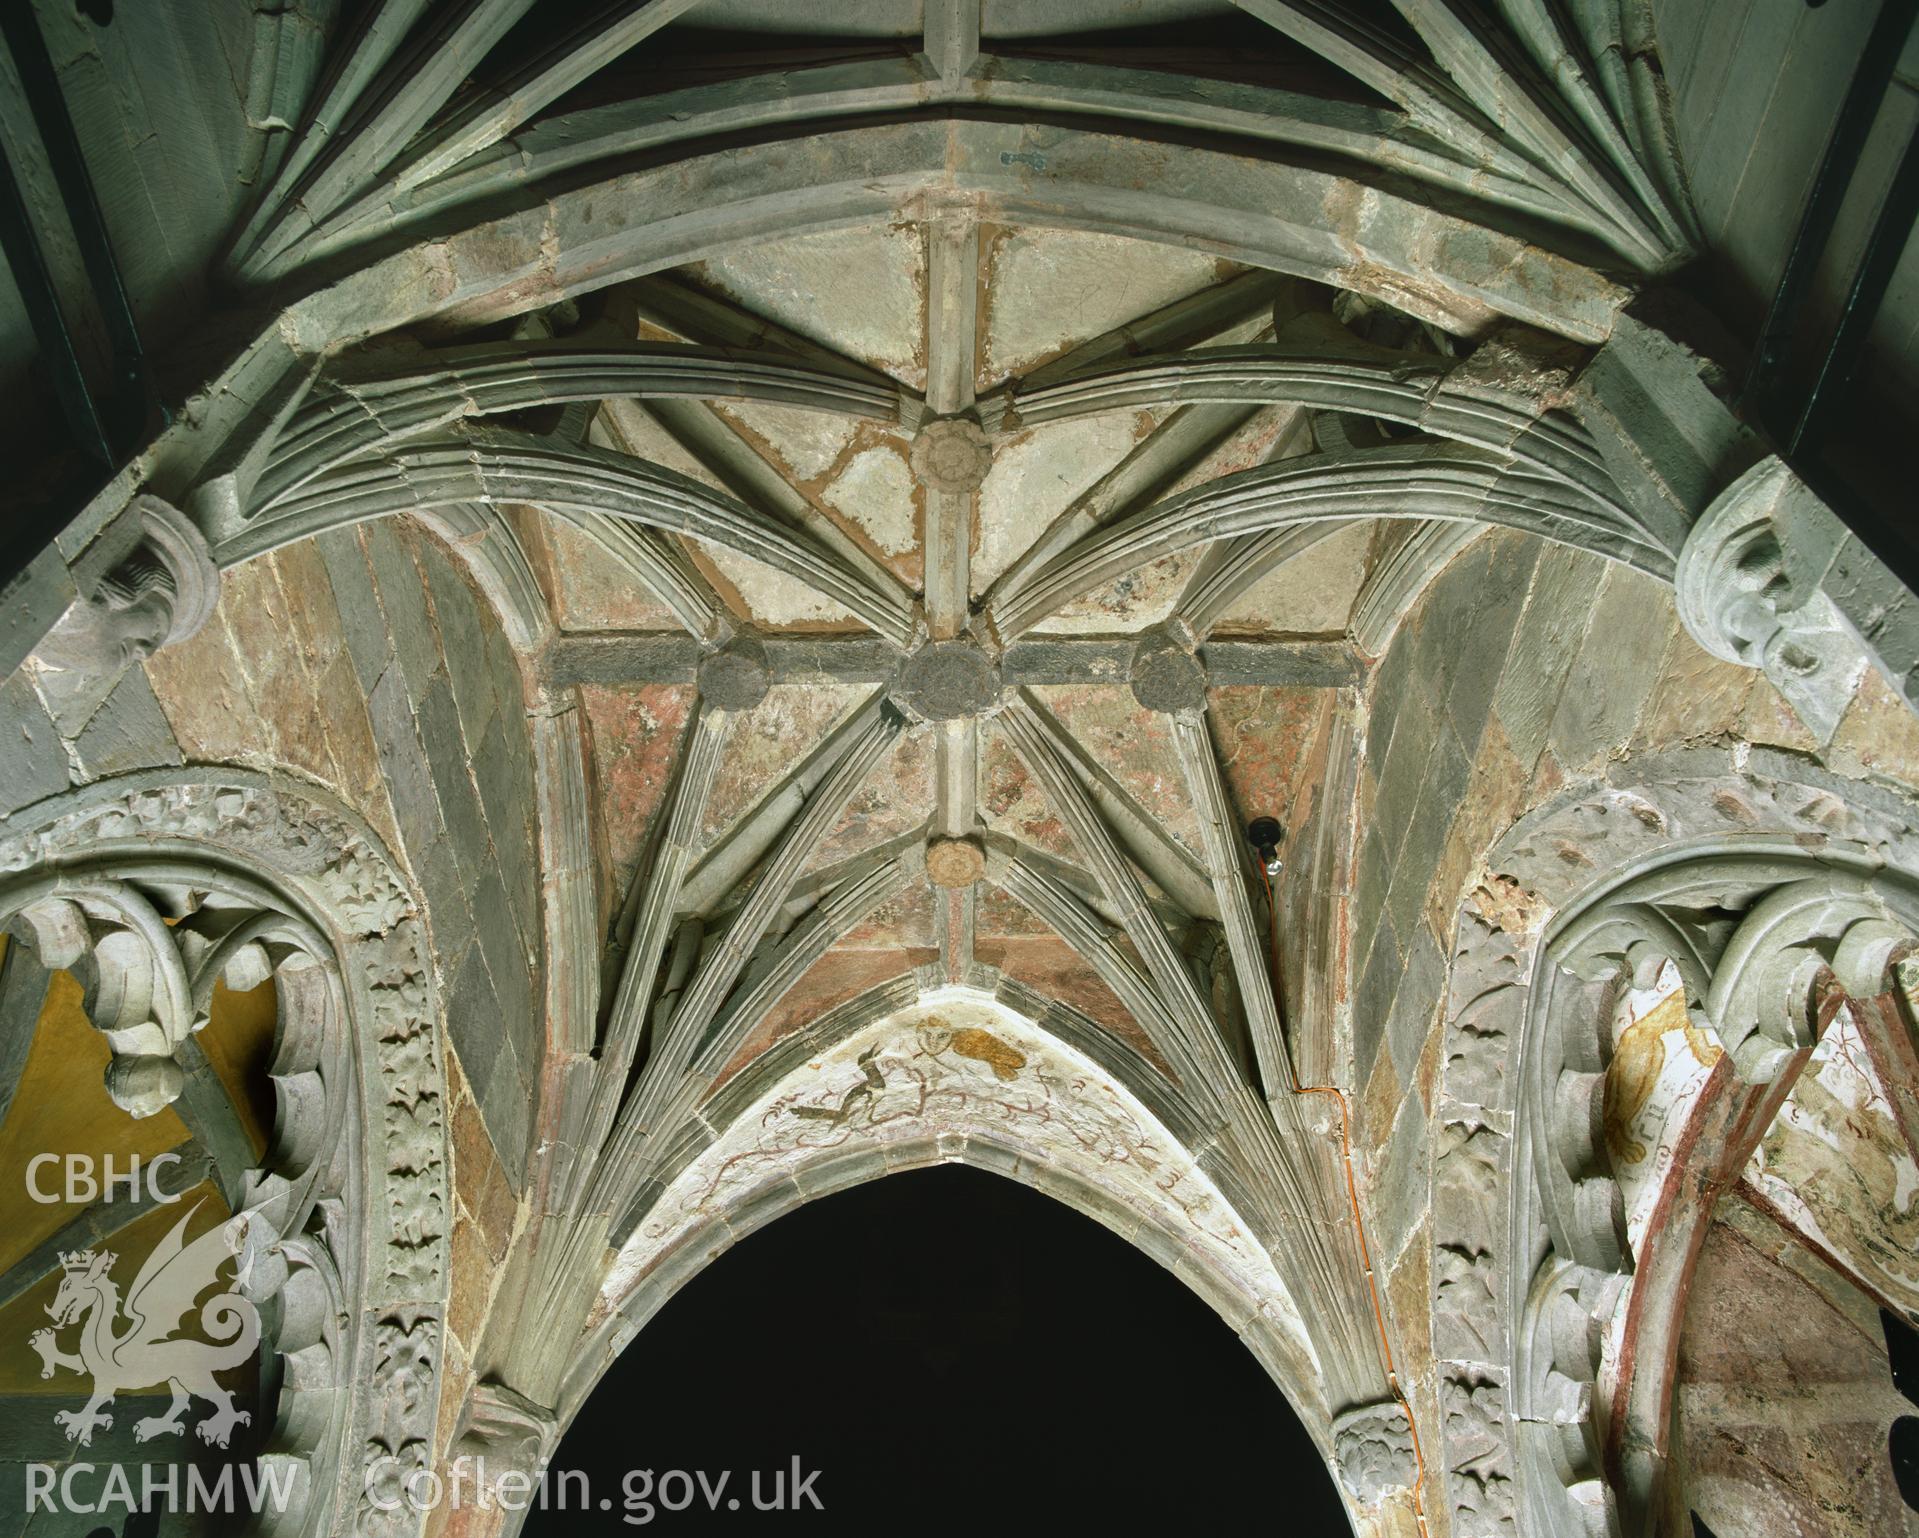 RCAHMW colour transparency showing vaulting at St Davids Cathedral, taken by RCAHMW, 2003